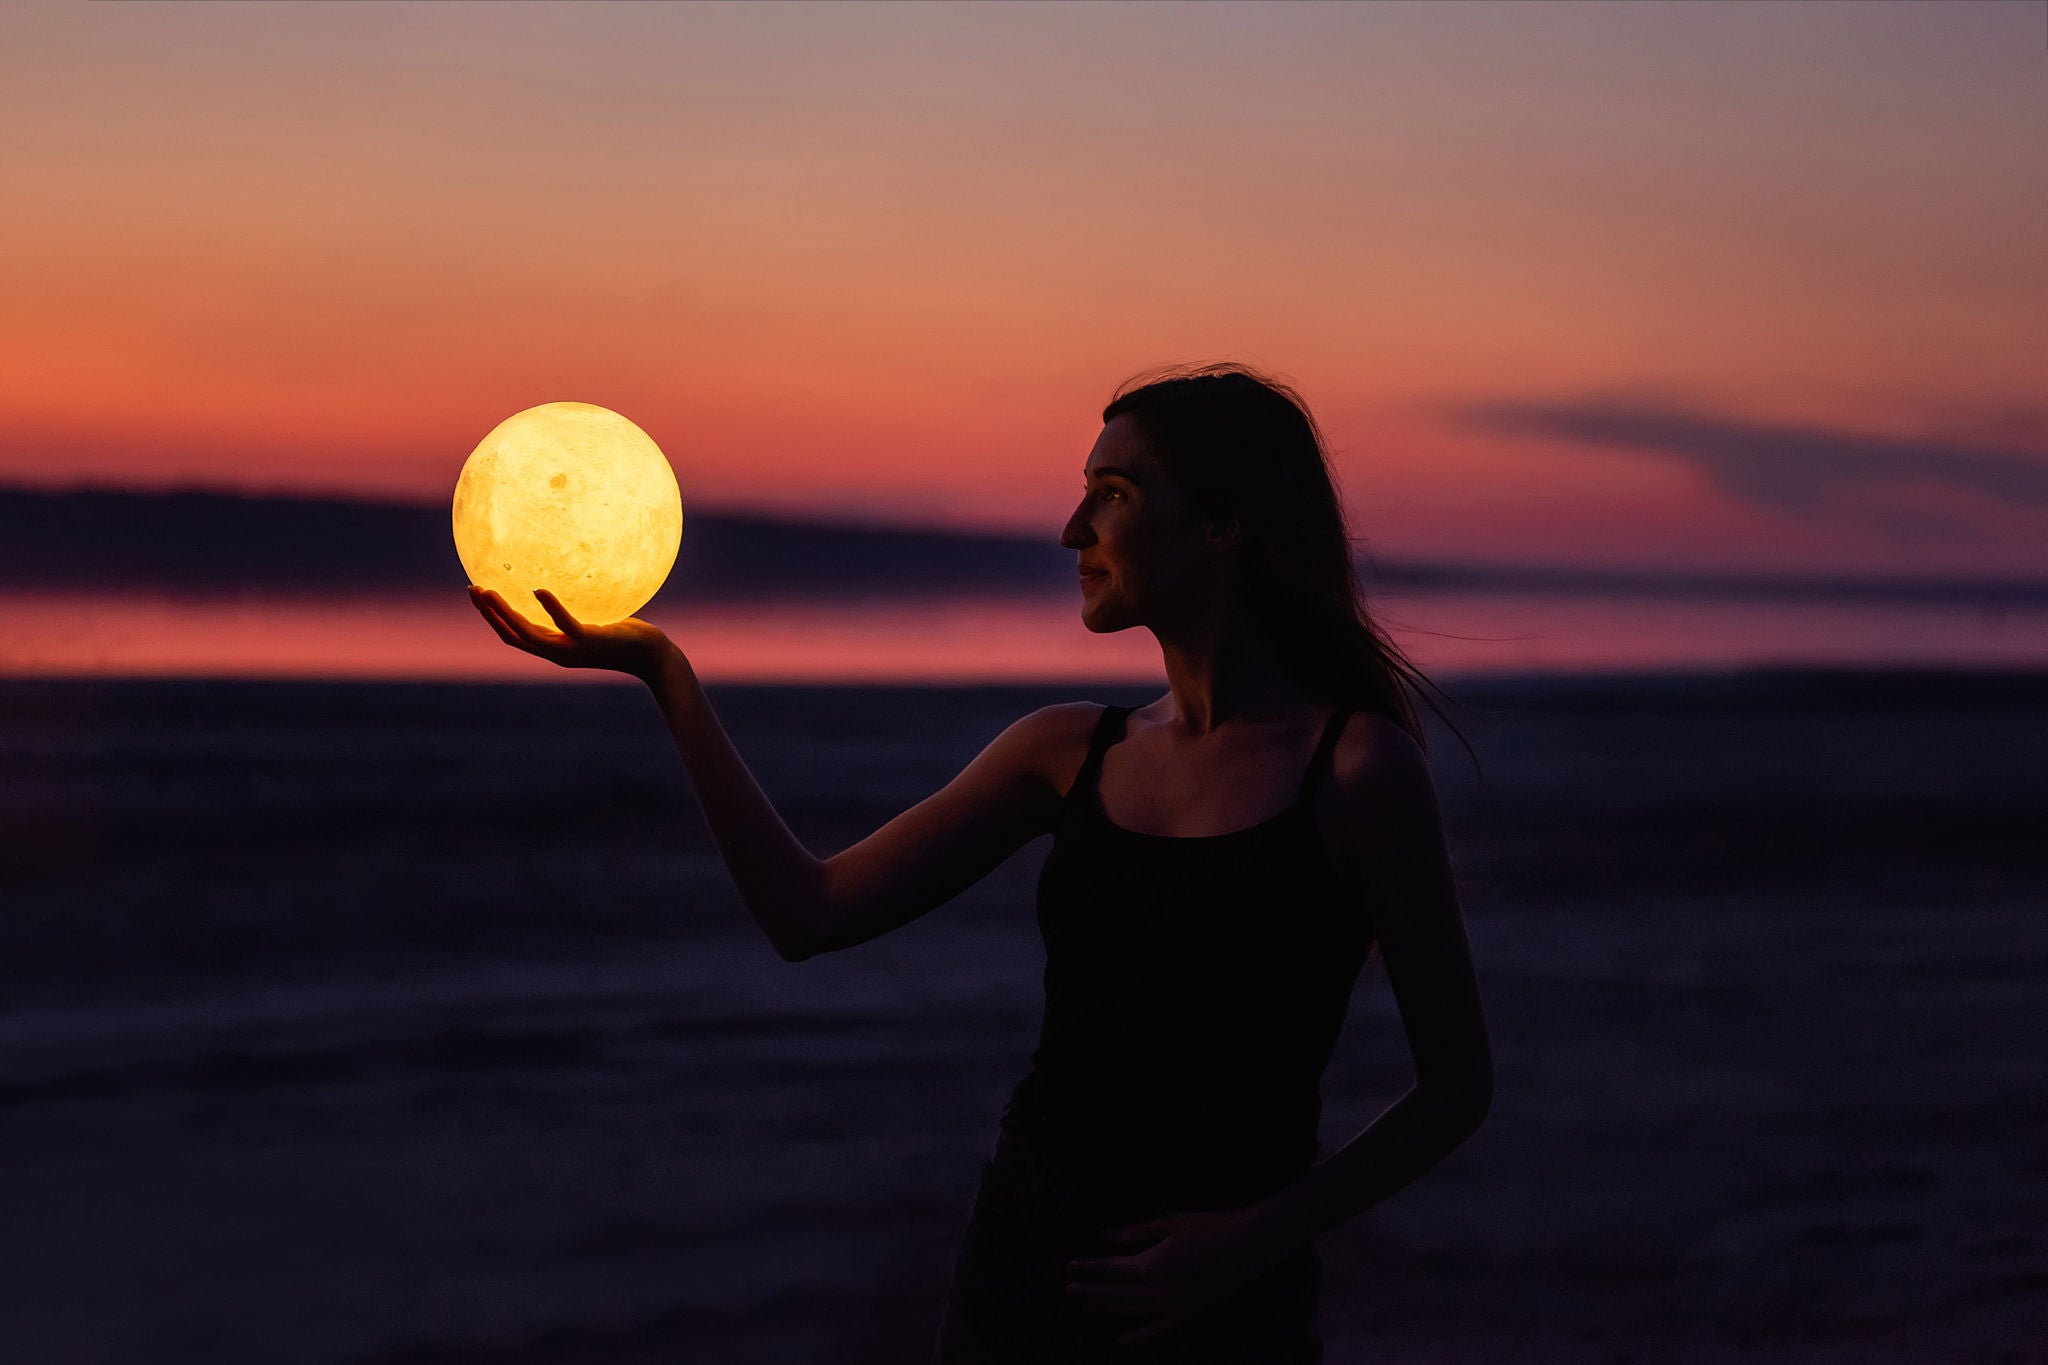 A young woman holds a moon lamp in her hand on a beach